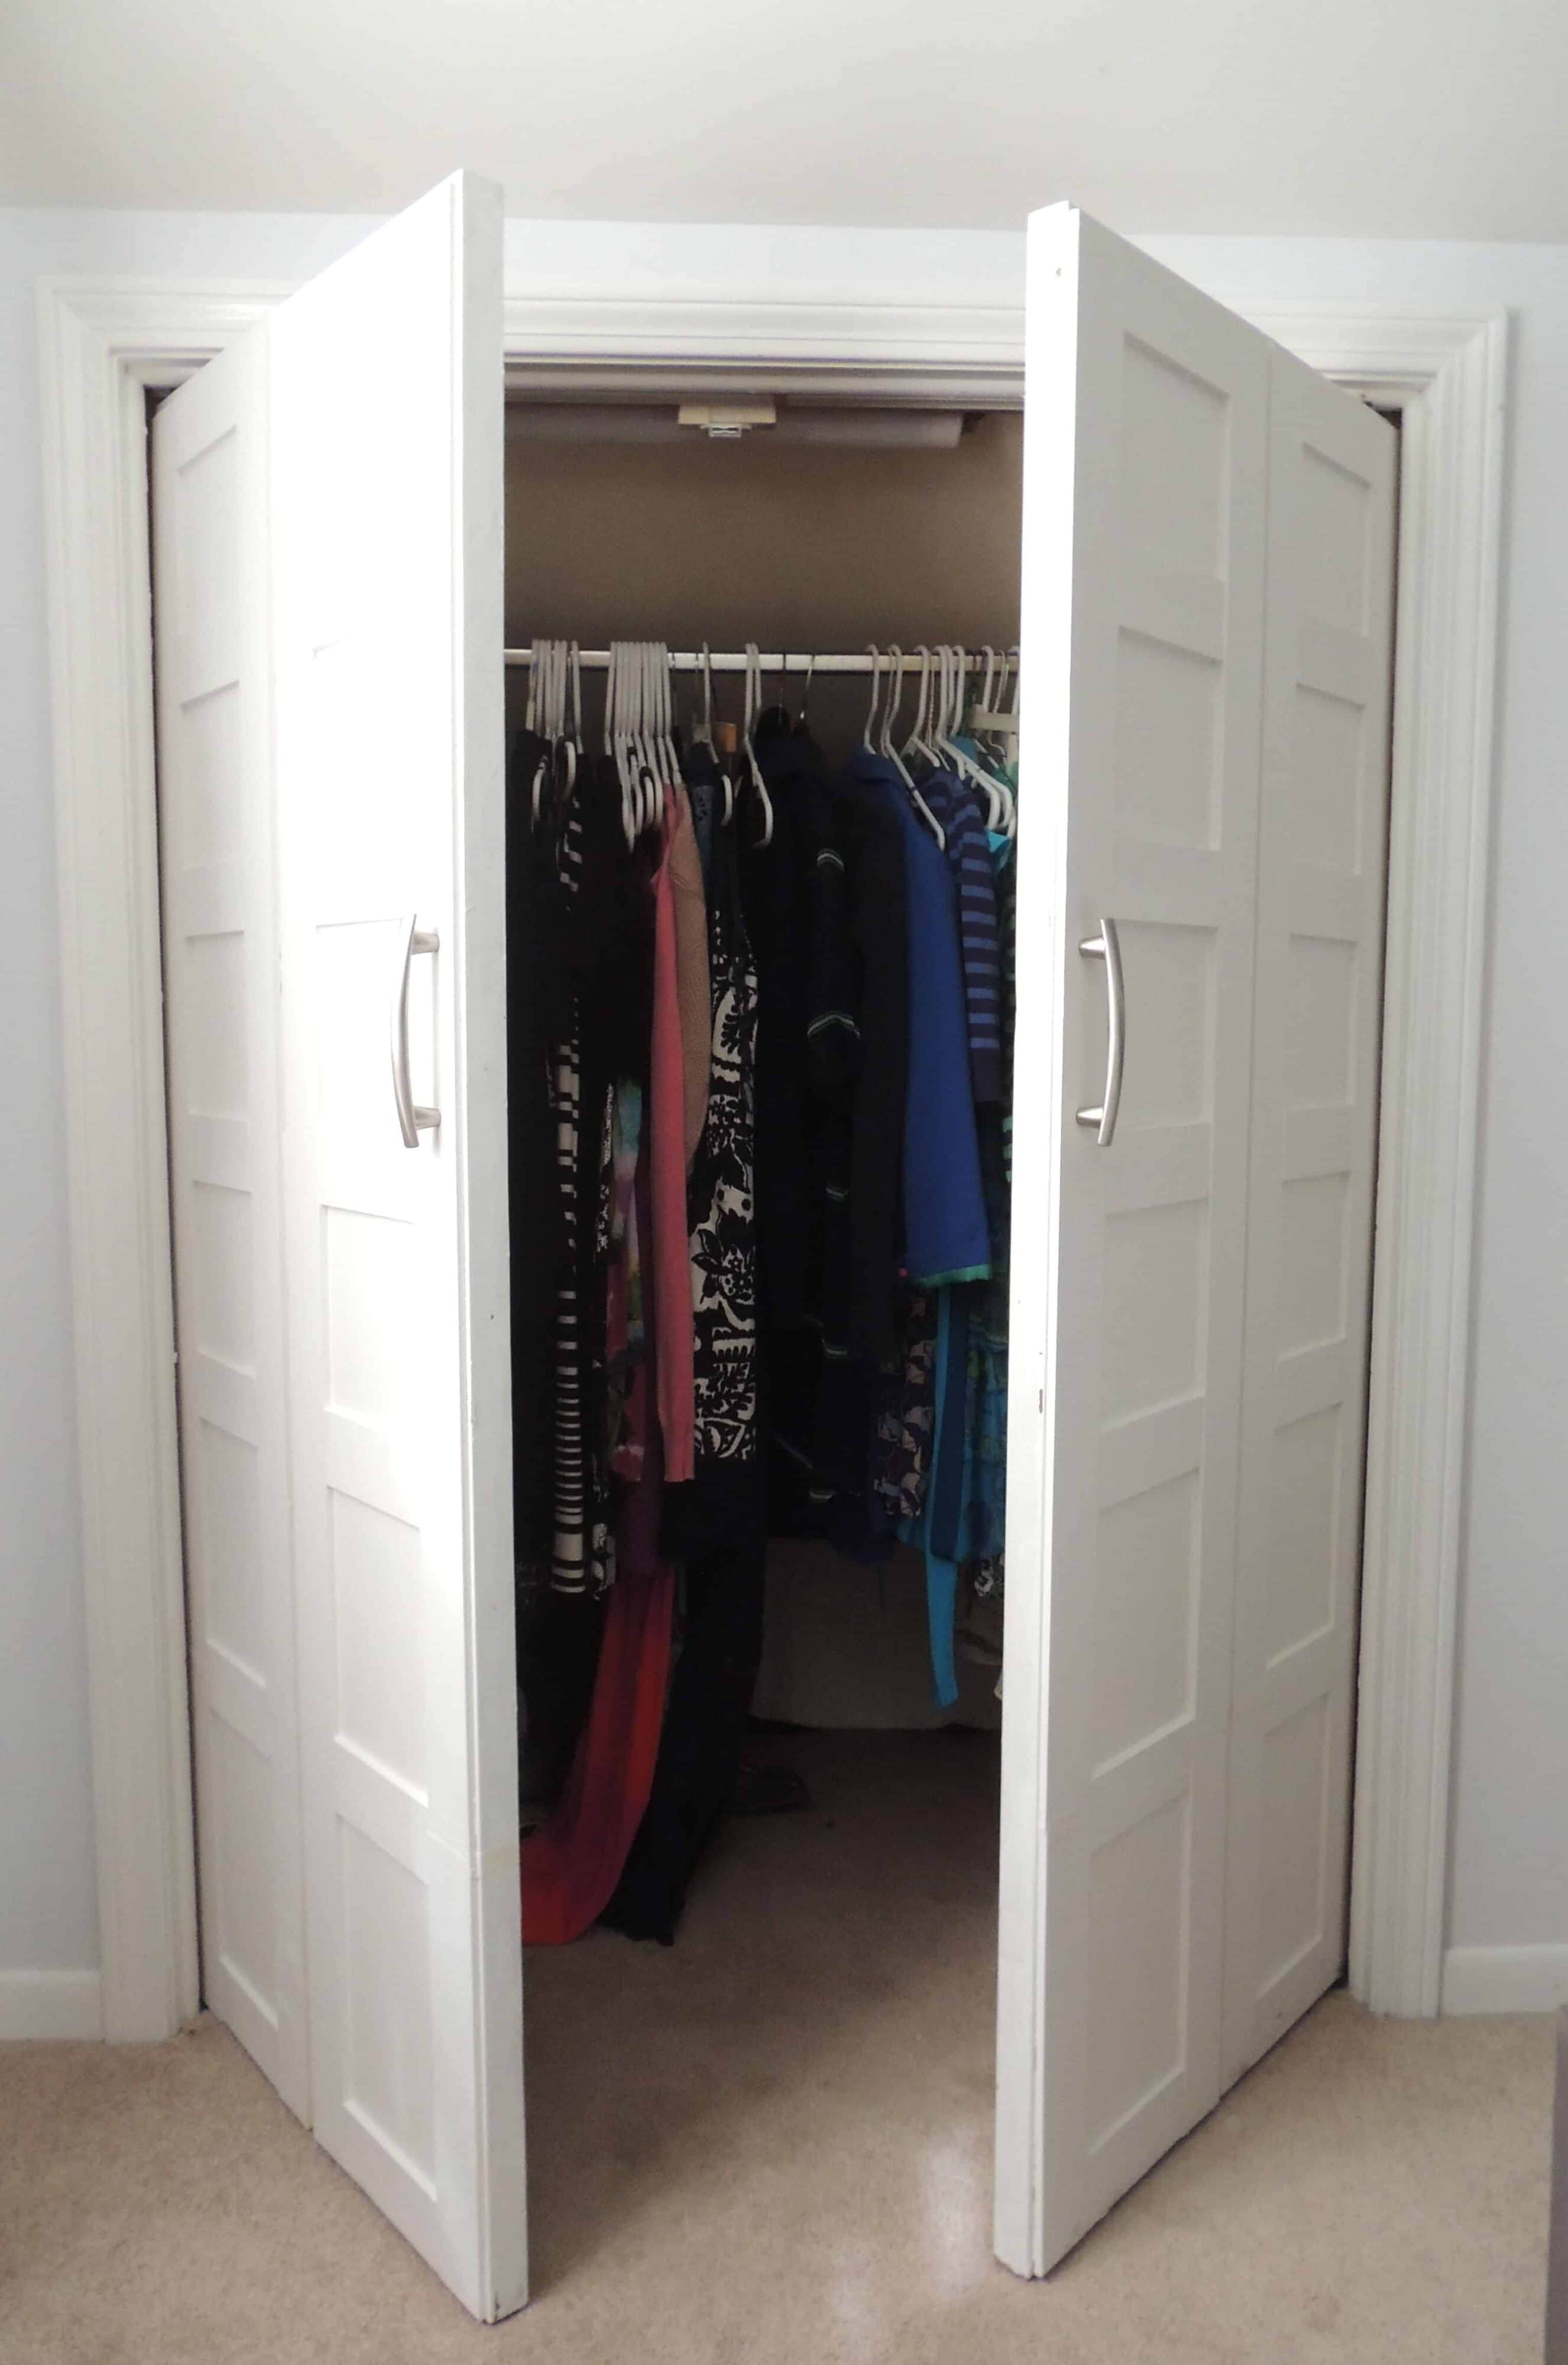 White bifold closet doors, slightly opened, now swinging out instead of folding